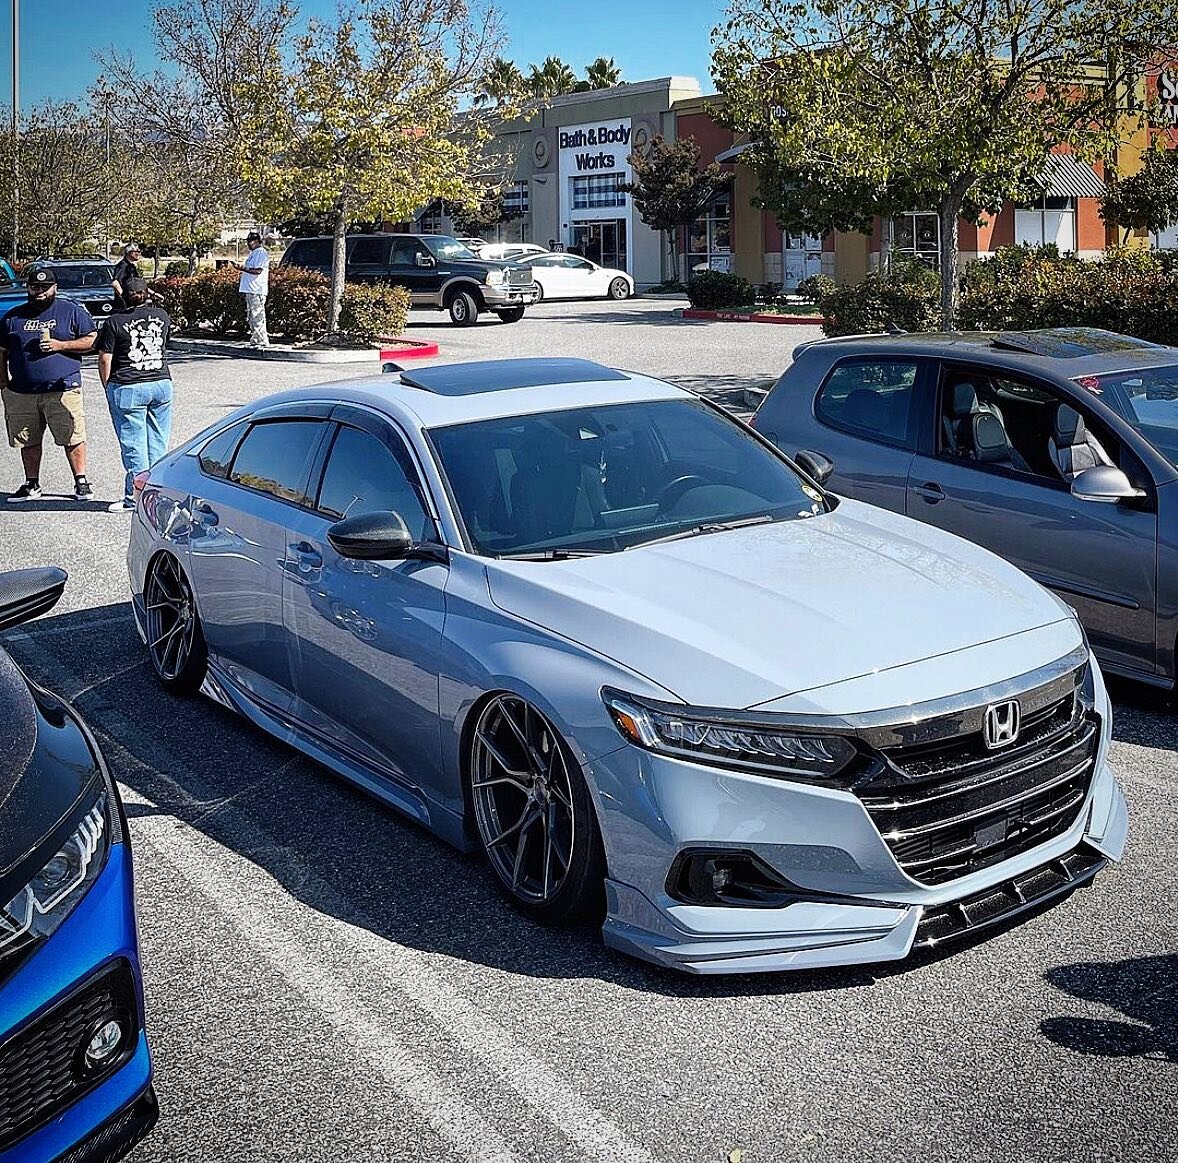 Stance S F 07 in Brushed DDT 20x10 fitted onto this bagged Honda Accord. Custom fitment&hellip;custom tailored to your build. Give us a call today!!! #stance #stancewheels #modifiedconcepts #honda #accord #customtailored #modifiedconcepts #airsociety